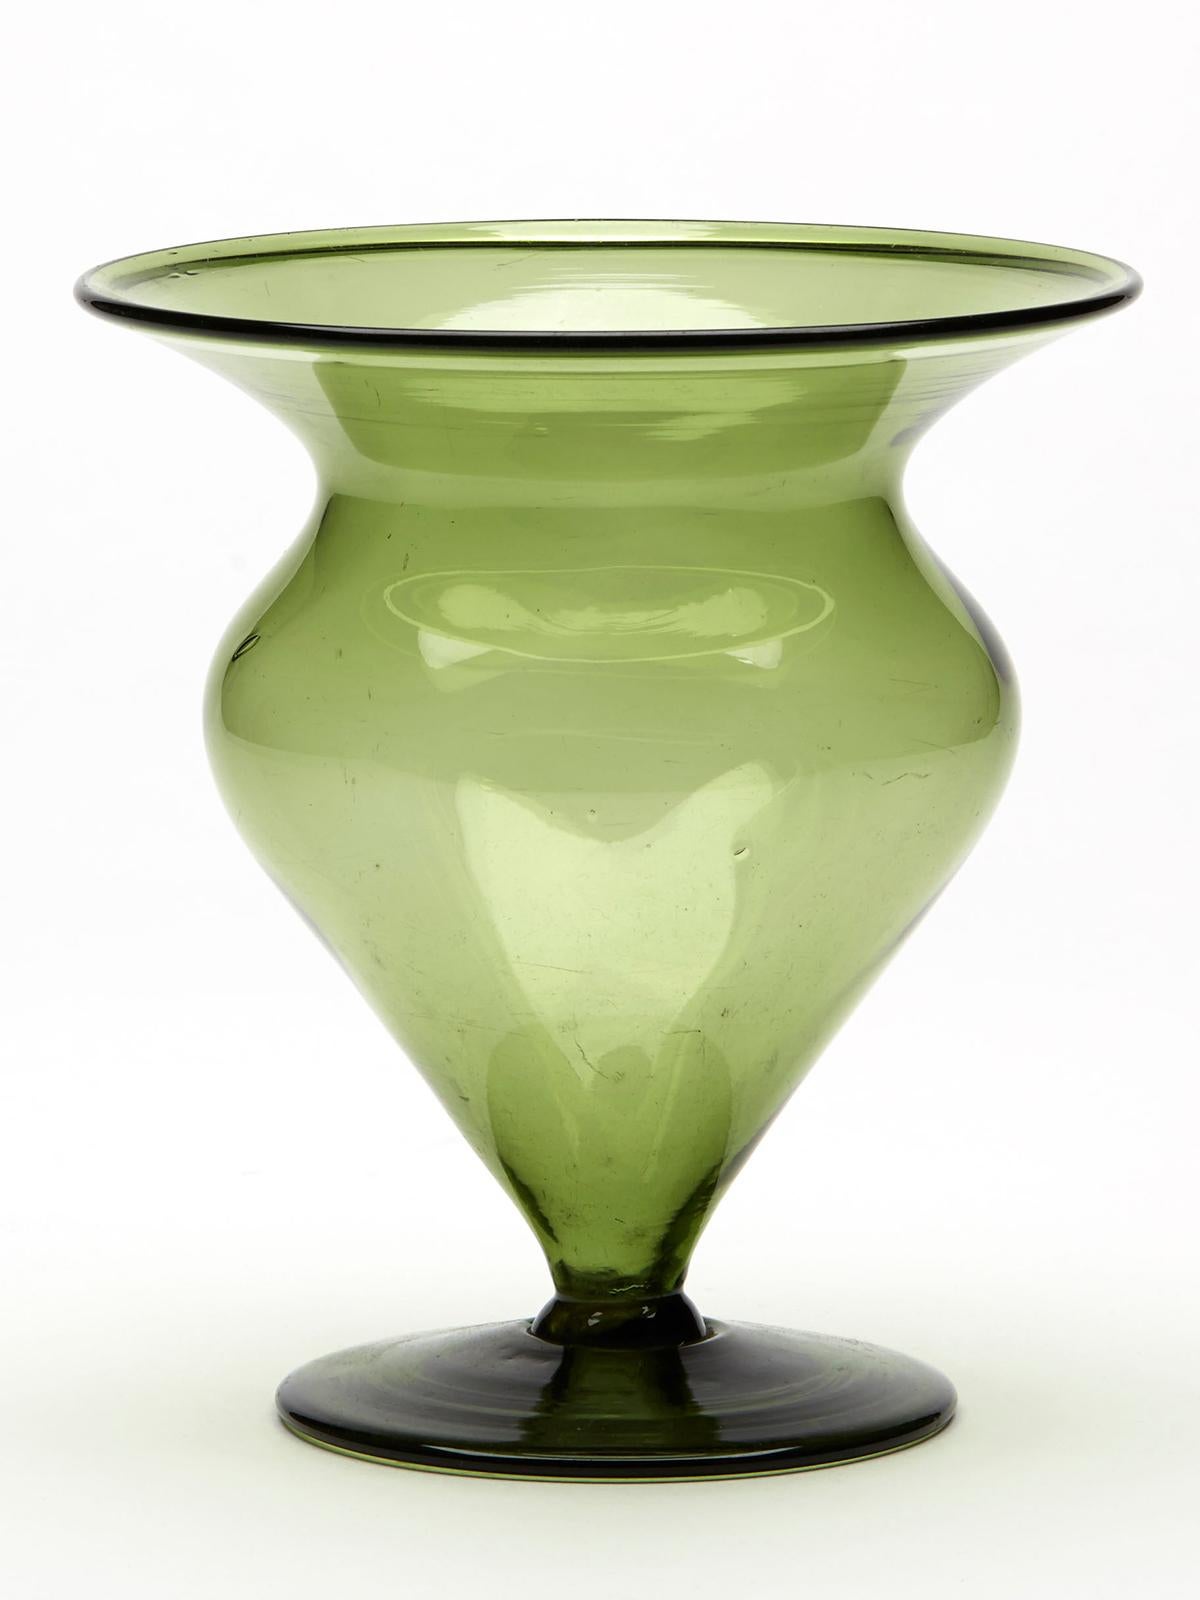 An absolutely stunning Arts & Crafts bud shaped art glass vase attributed to renowned glass maker Harry James Powell (British, 1853 - 1922) and dating from around 1900. The vase hand blown in a green tinted glass stands on a wide round foot rim with